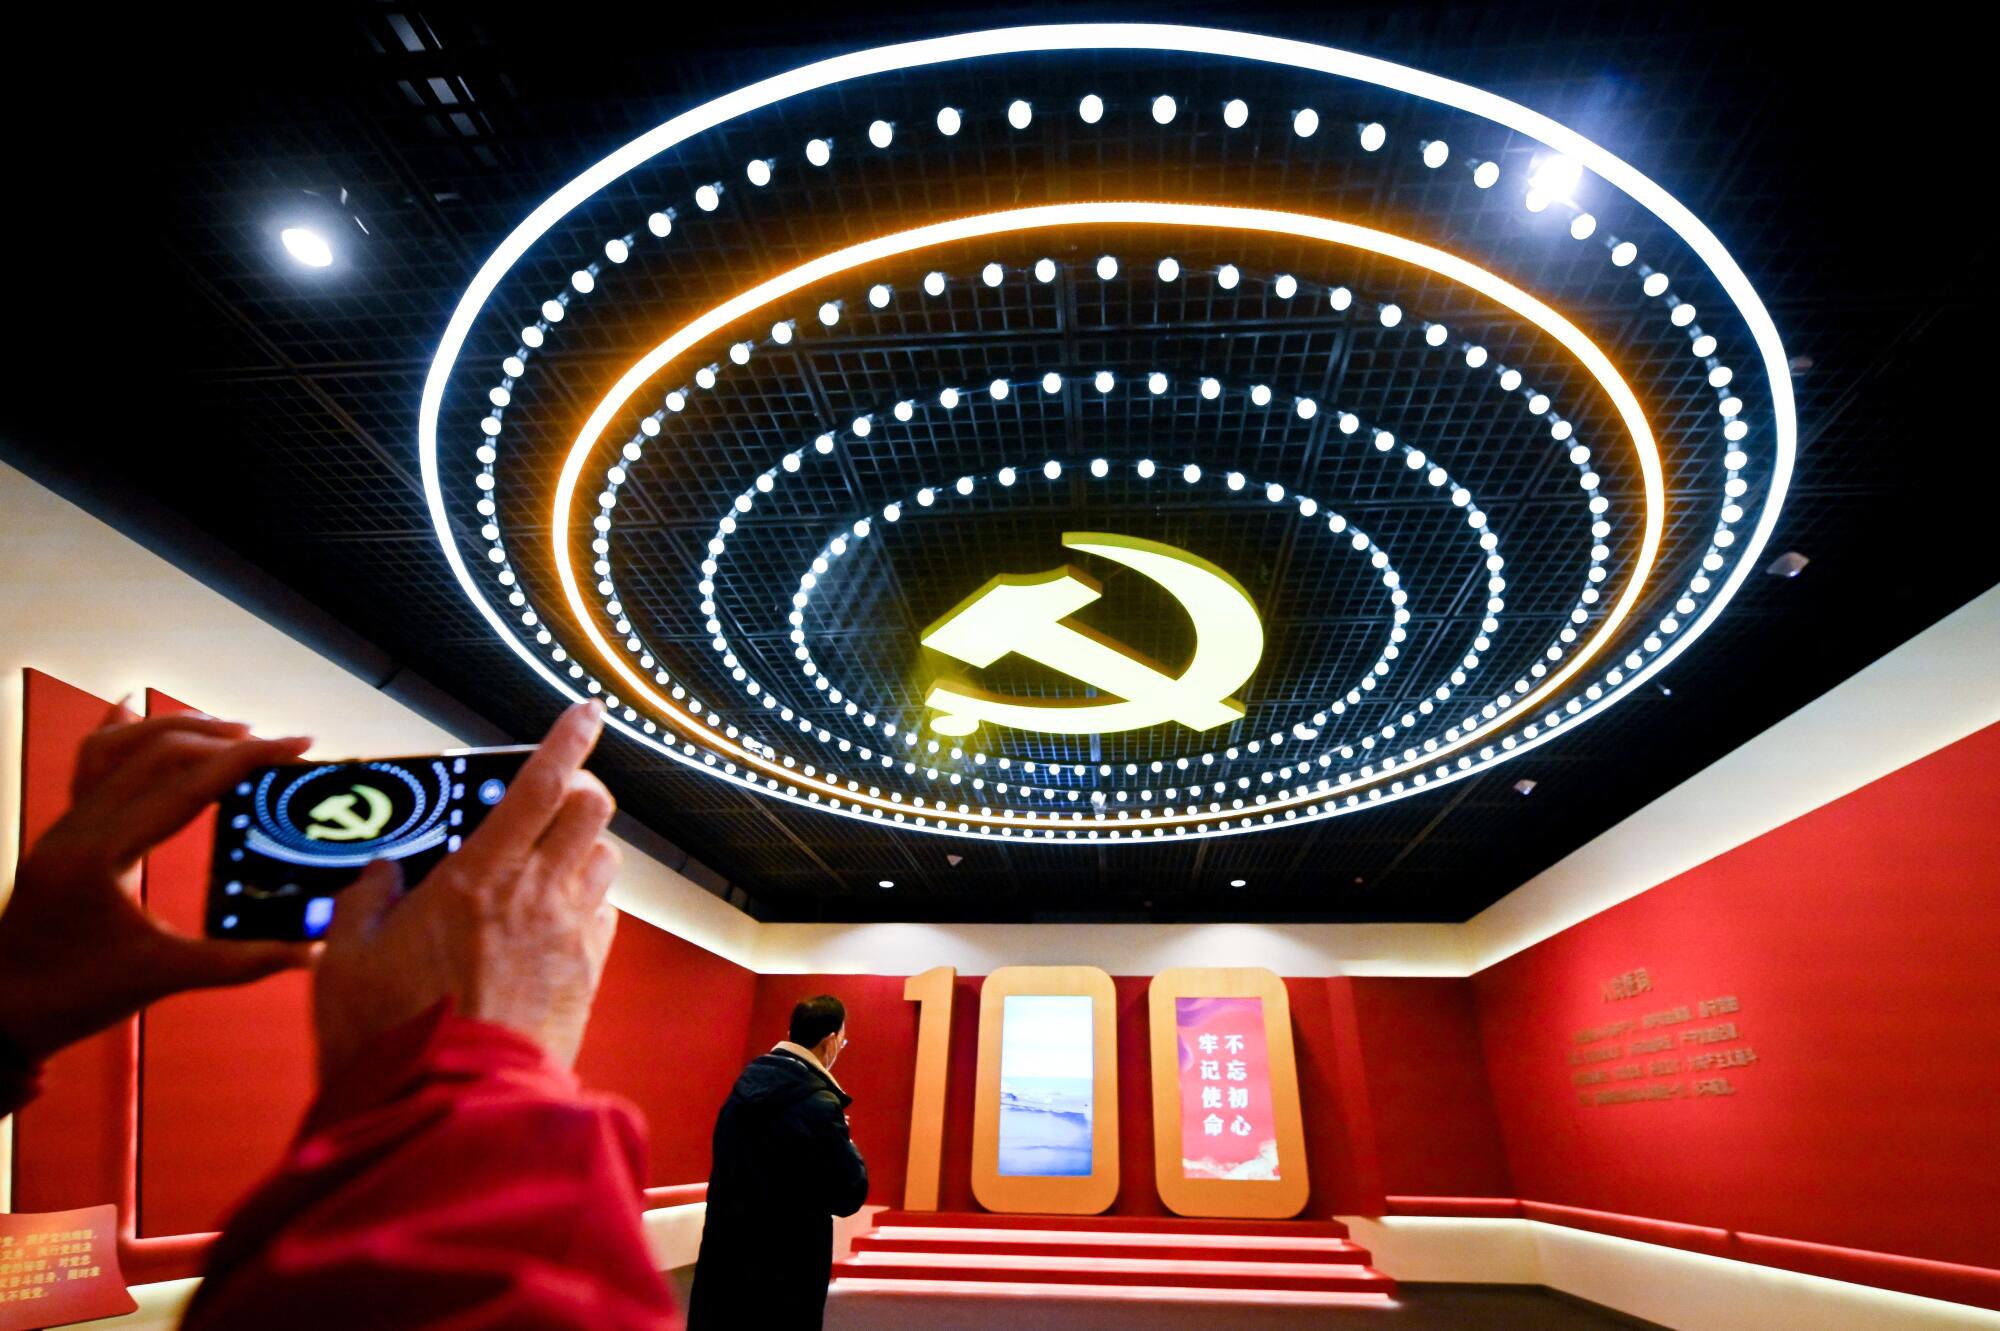 A hammer and sickle logo on the ceiling is ringed by lights in a red room